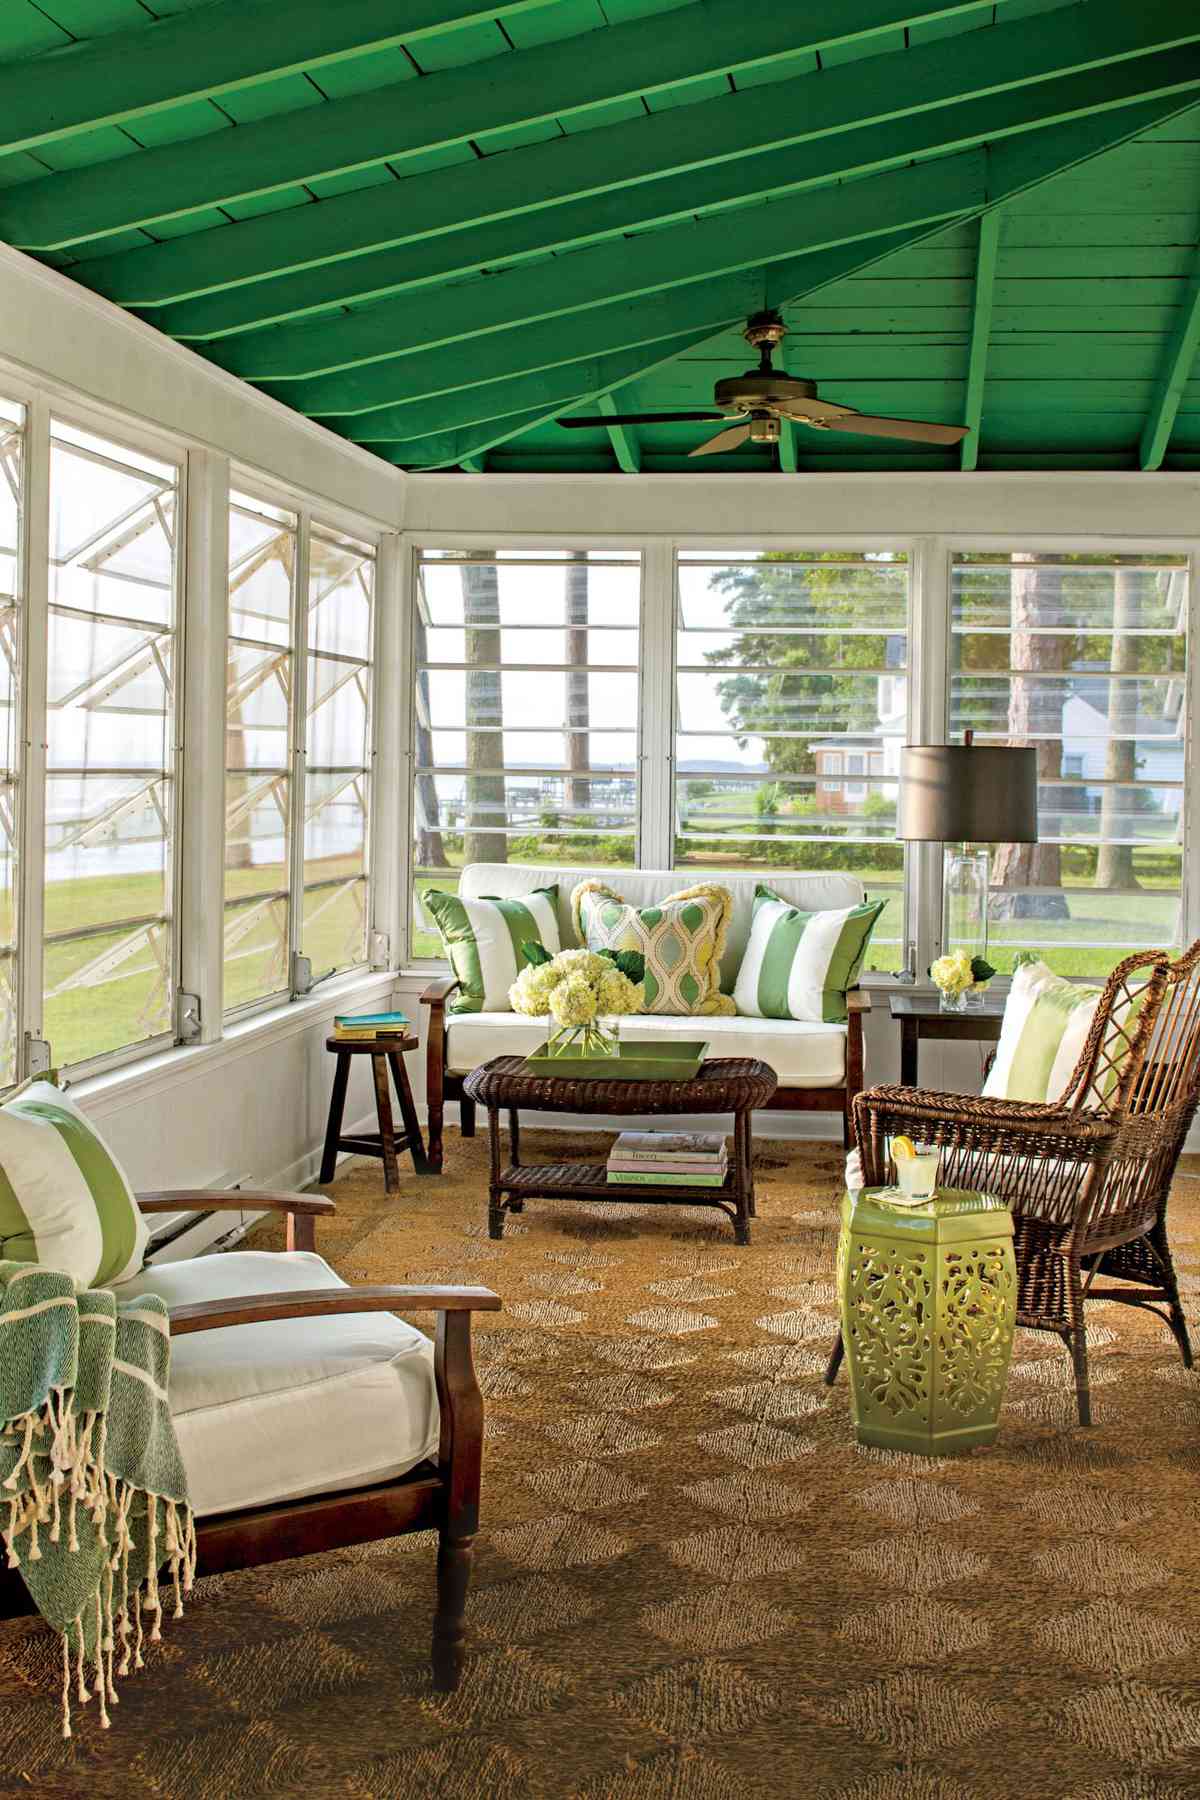 River house sunroom with green painted ceiling and hand-crank jalousie windows